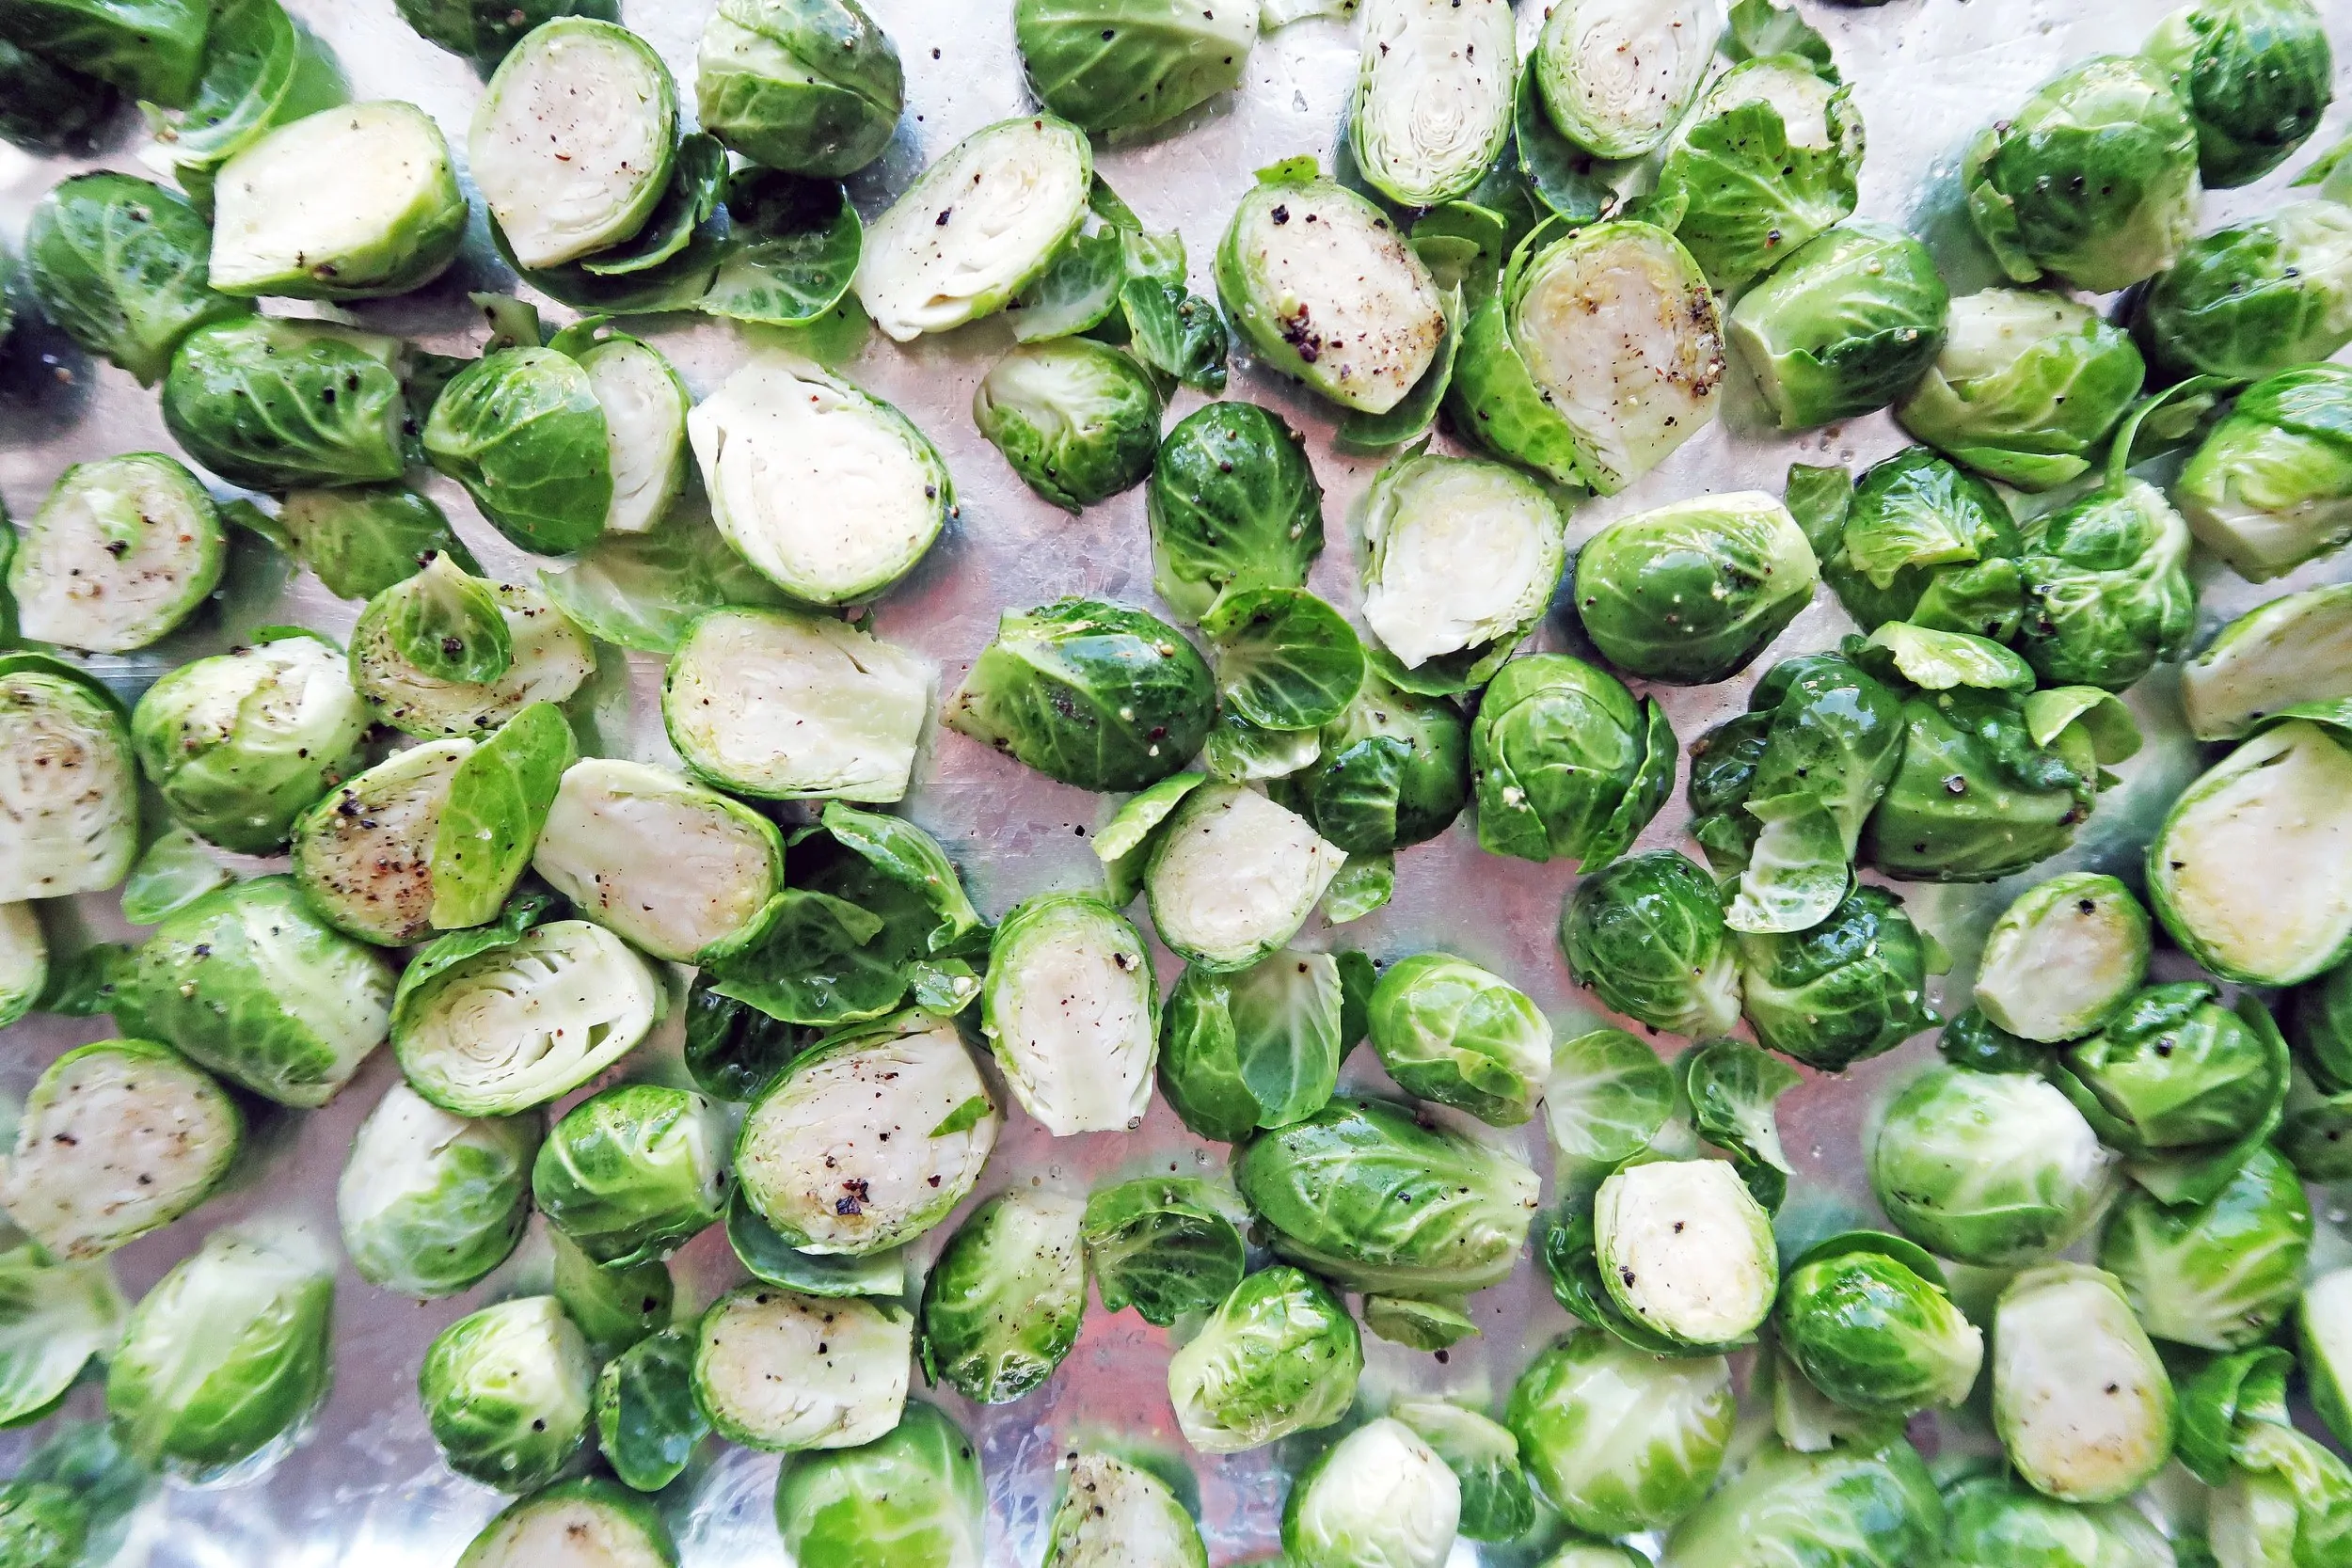 Brussels sprouts cut in half and seasoned with olive oil, salt, and pepper on a baking sheet.